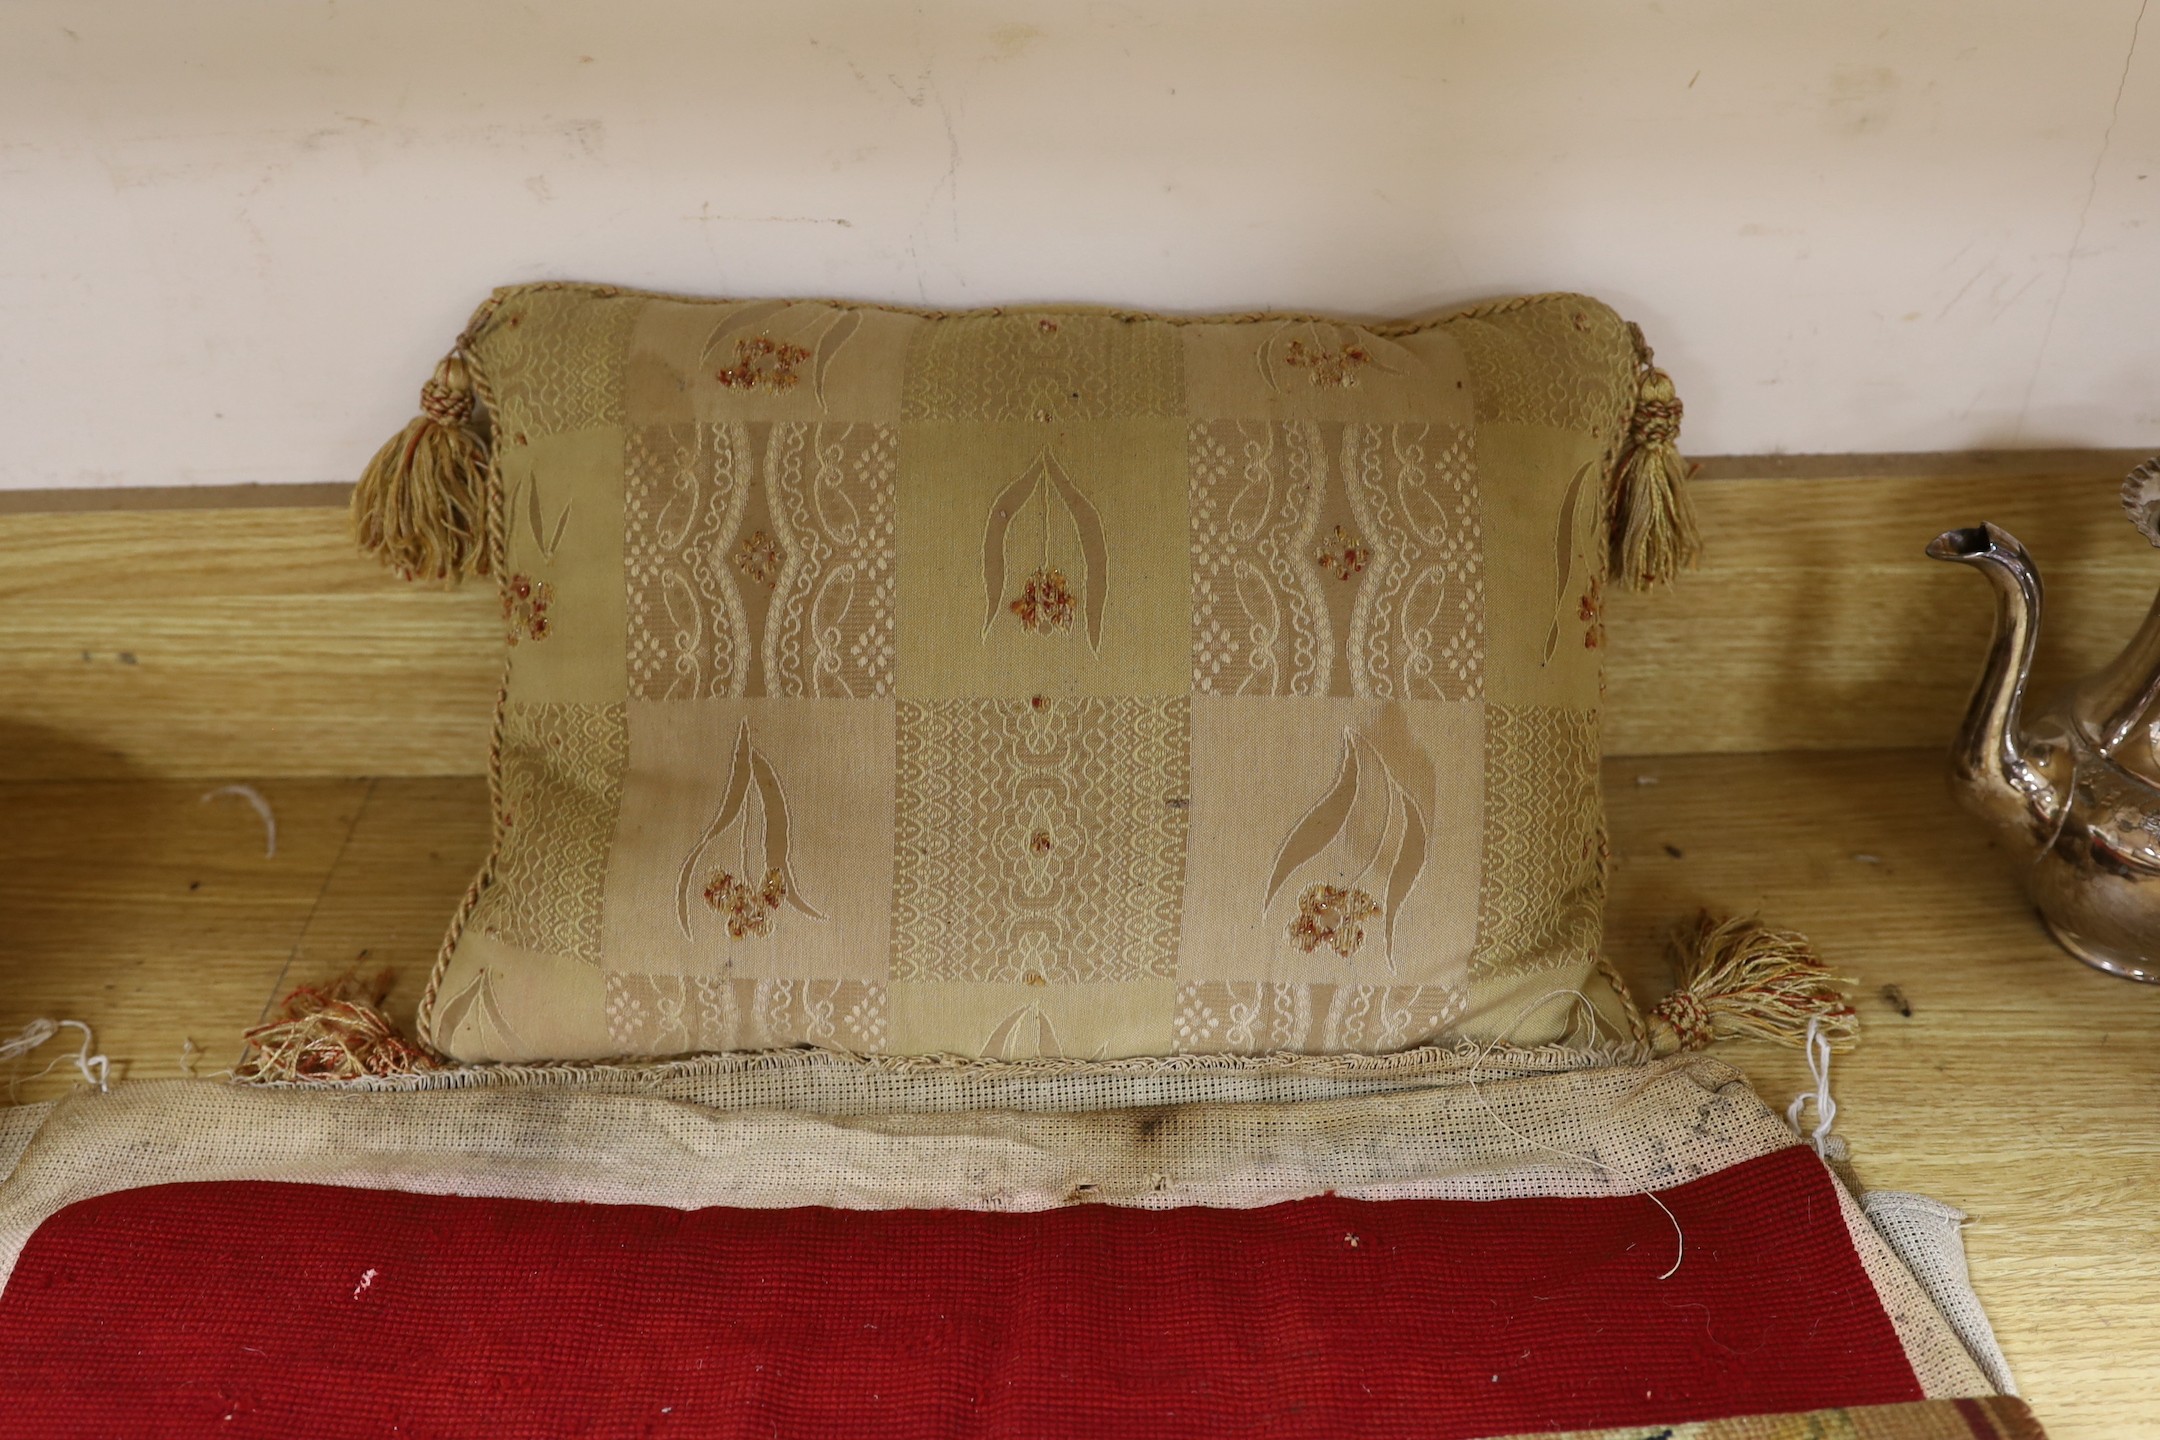 A French 18th century woolwork cushion, 2 chair covers, another panel, a tasselled brocade cushion and an Indian metallic brocaded patchworked cover